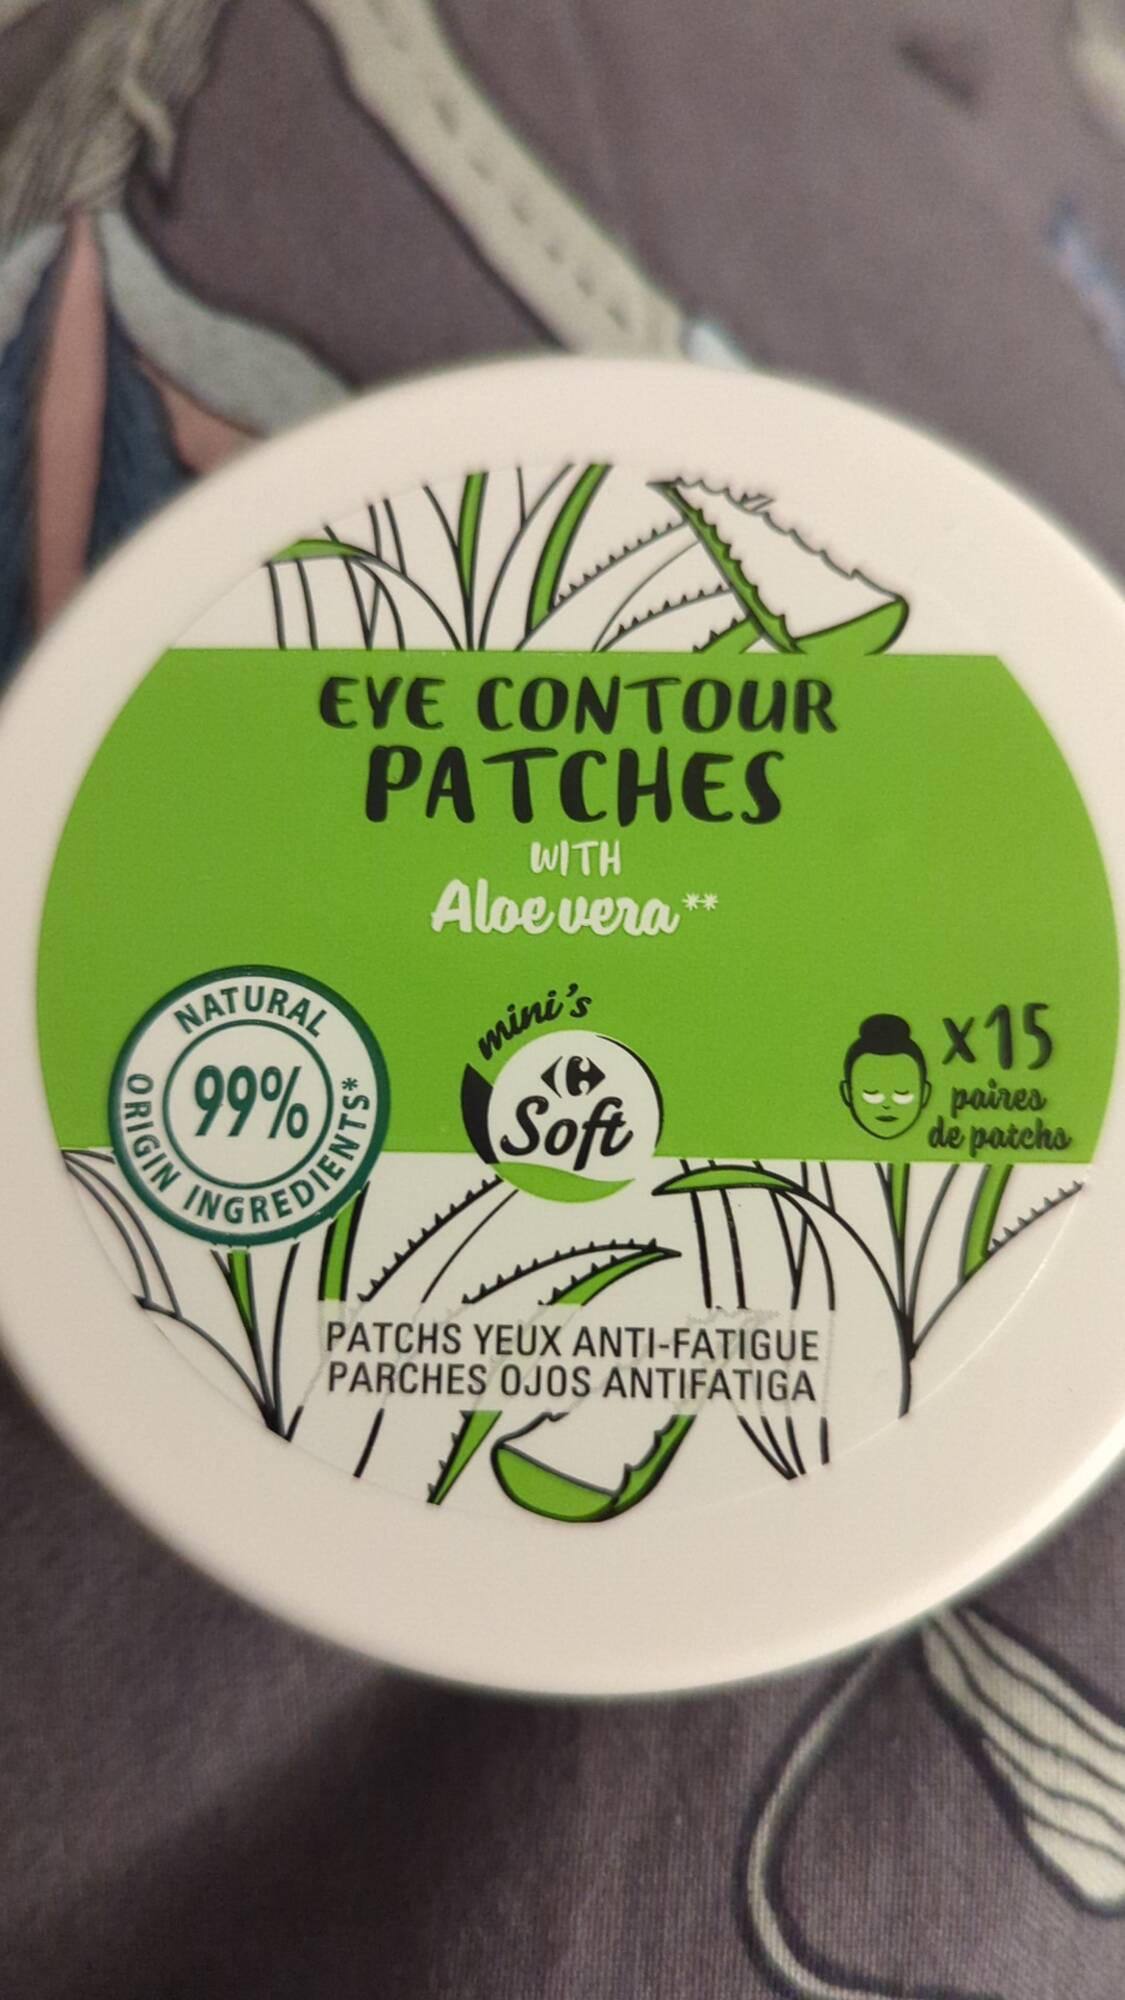 CARREFOUR SOFT - Eye Contour Patches with aloe vera